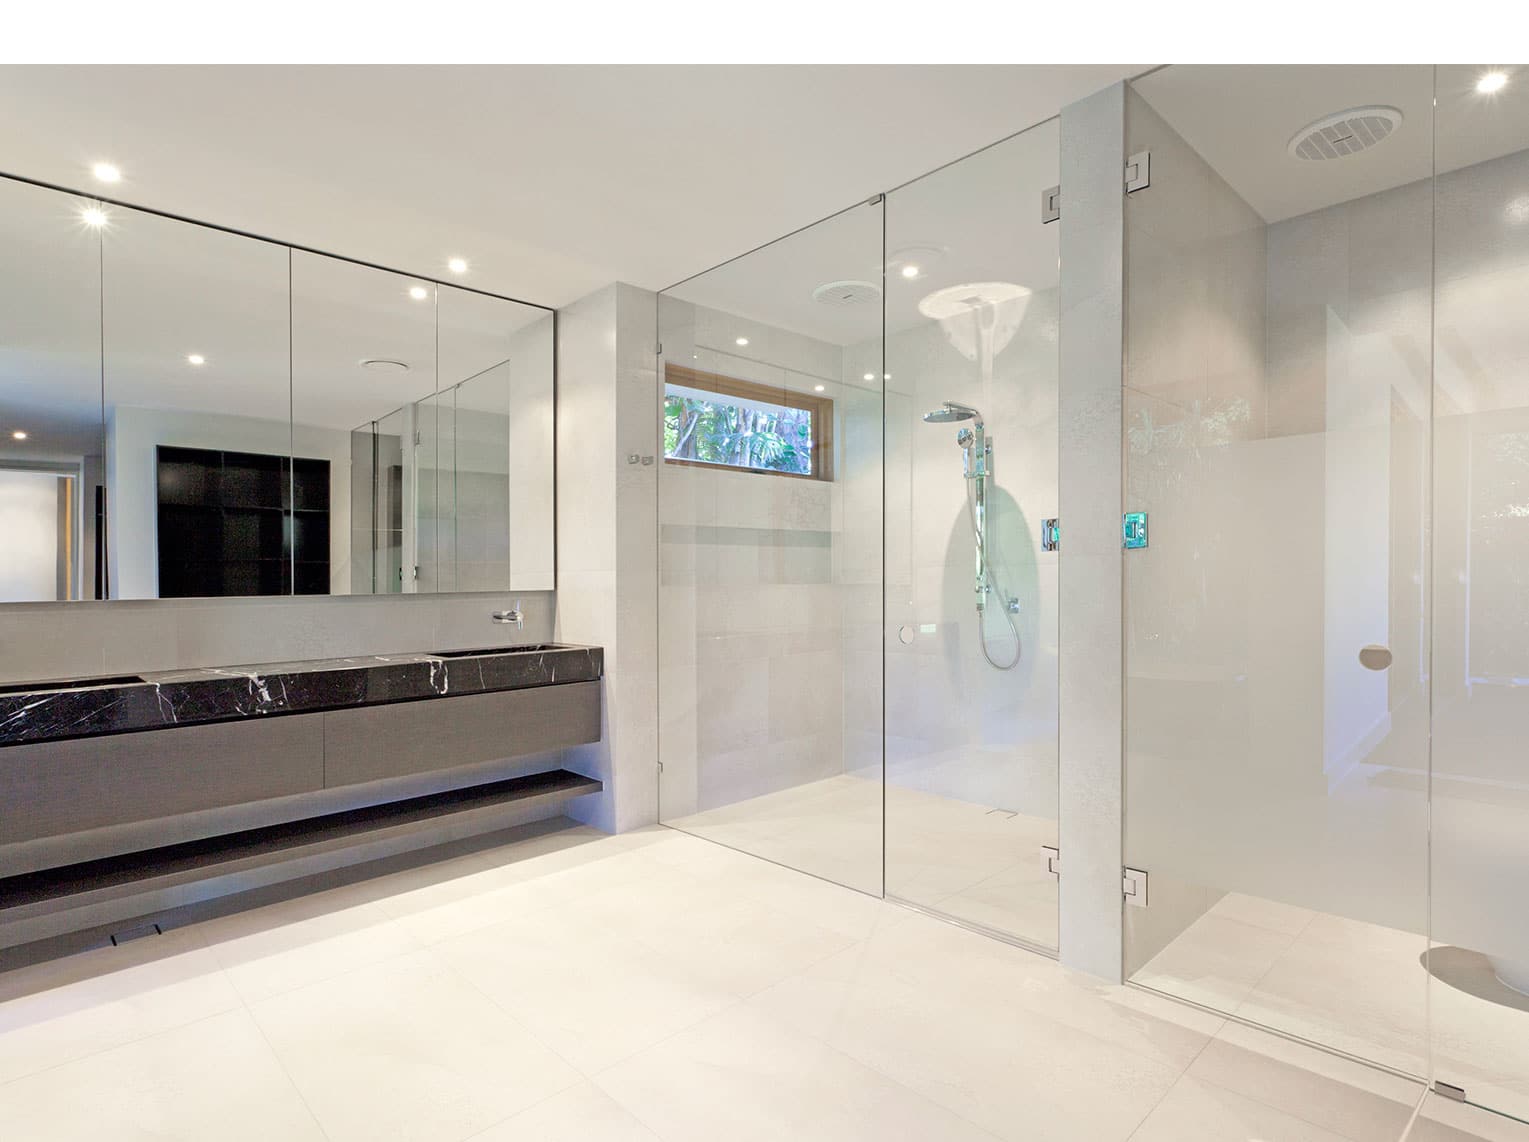 Bathroom with frameless glass shower screens and large bathroom mirror